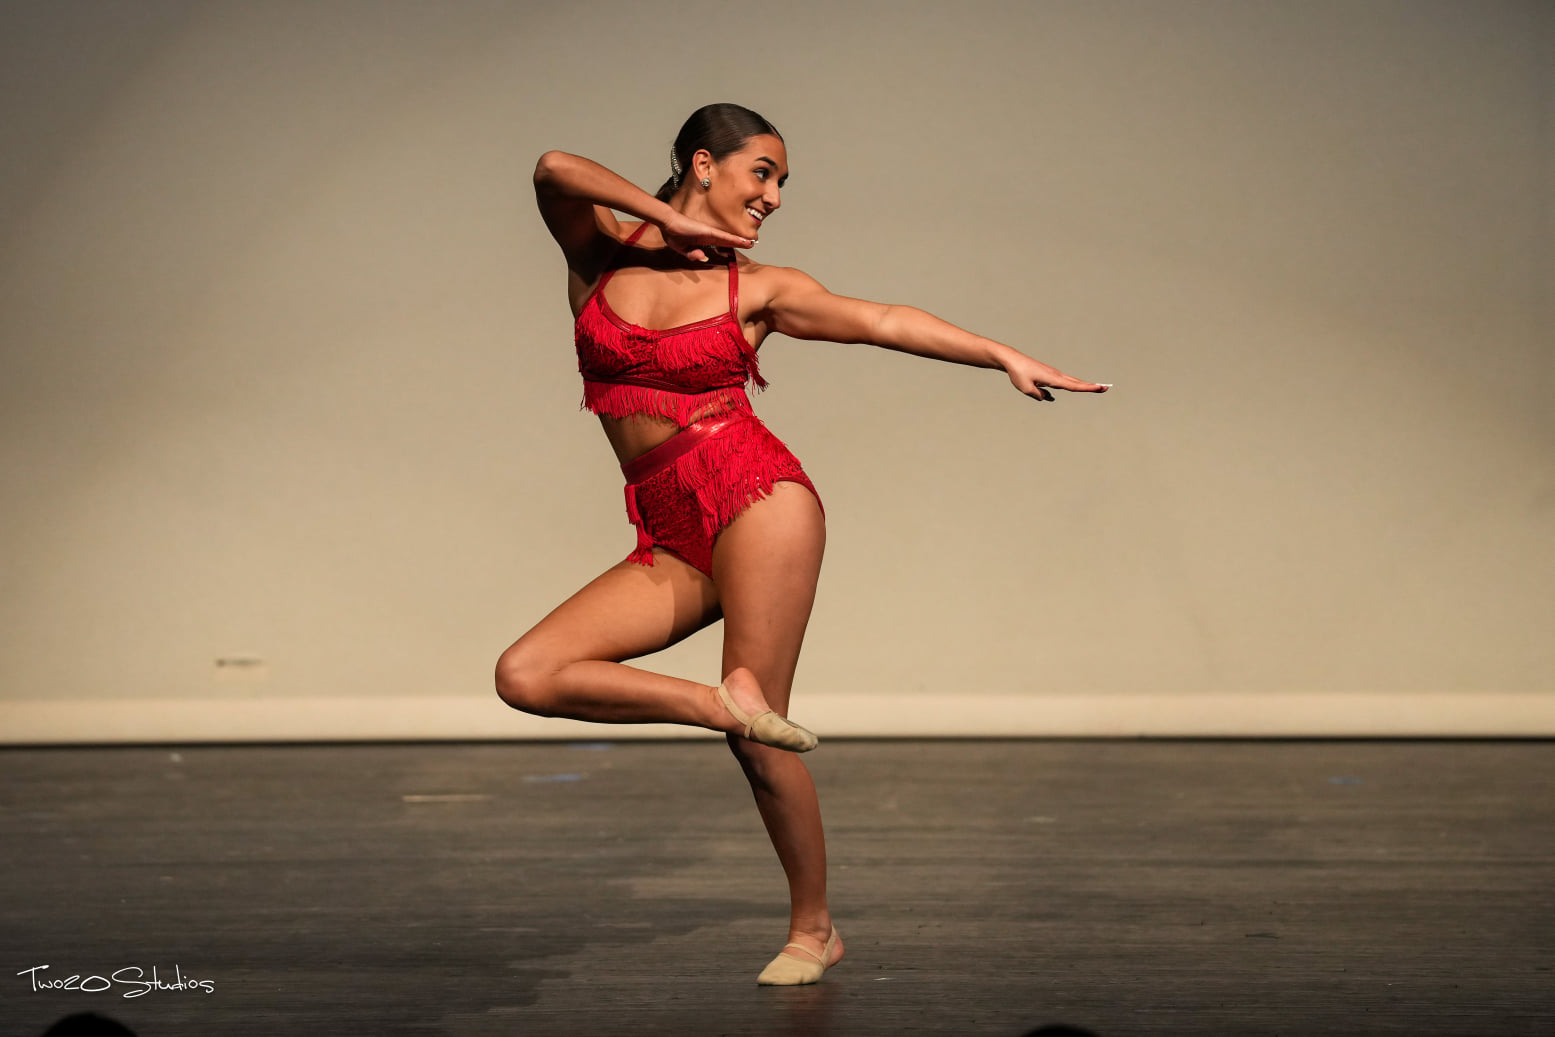 Emotional Female Ballet Dancer in Body Suit and Posing in Dance in